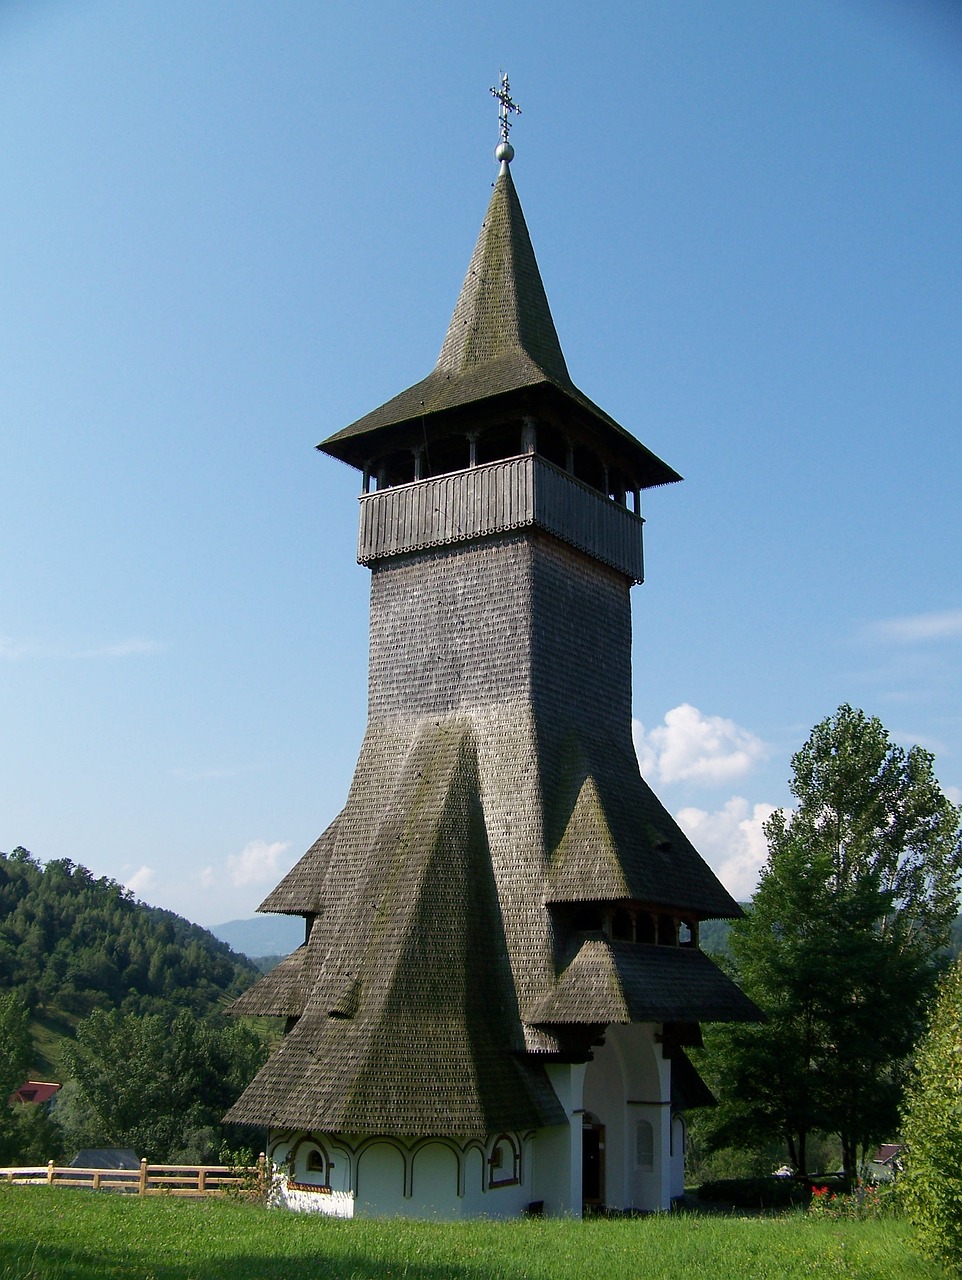 a church sitting in the middle of a lush green field, inspired by Hristofor Žefarović, flickr, renaissance, wooden structures, cone shaped, top - side view, integrated in the mountains